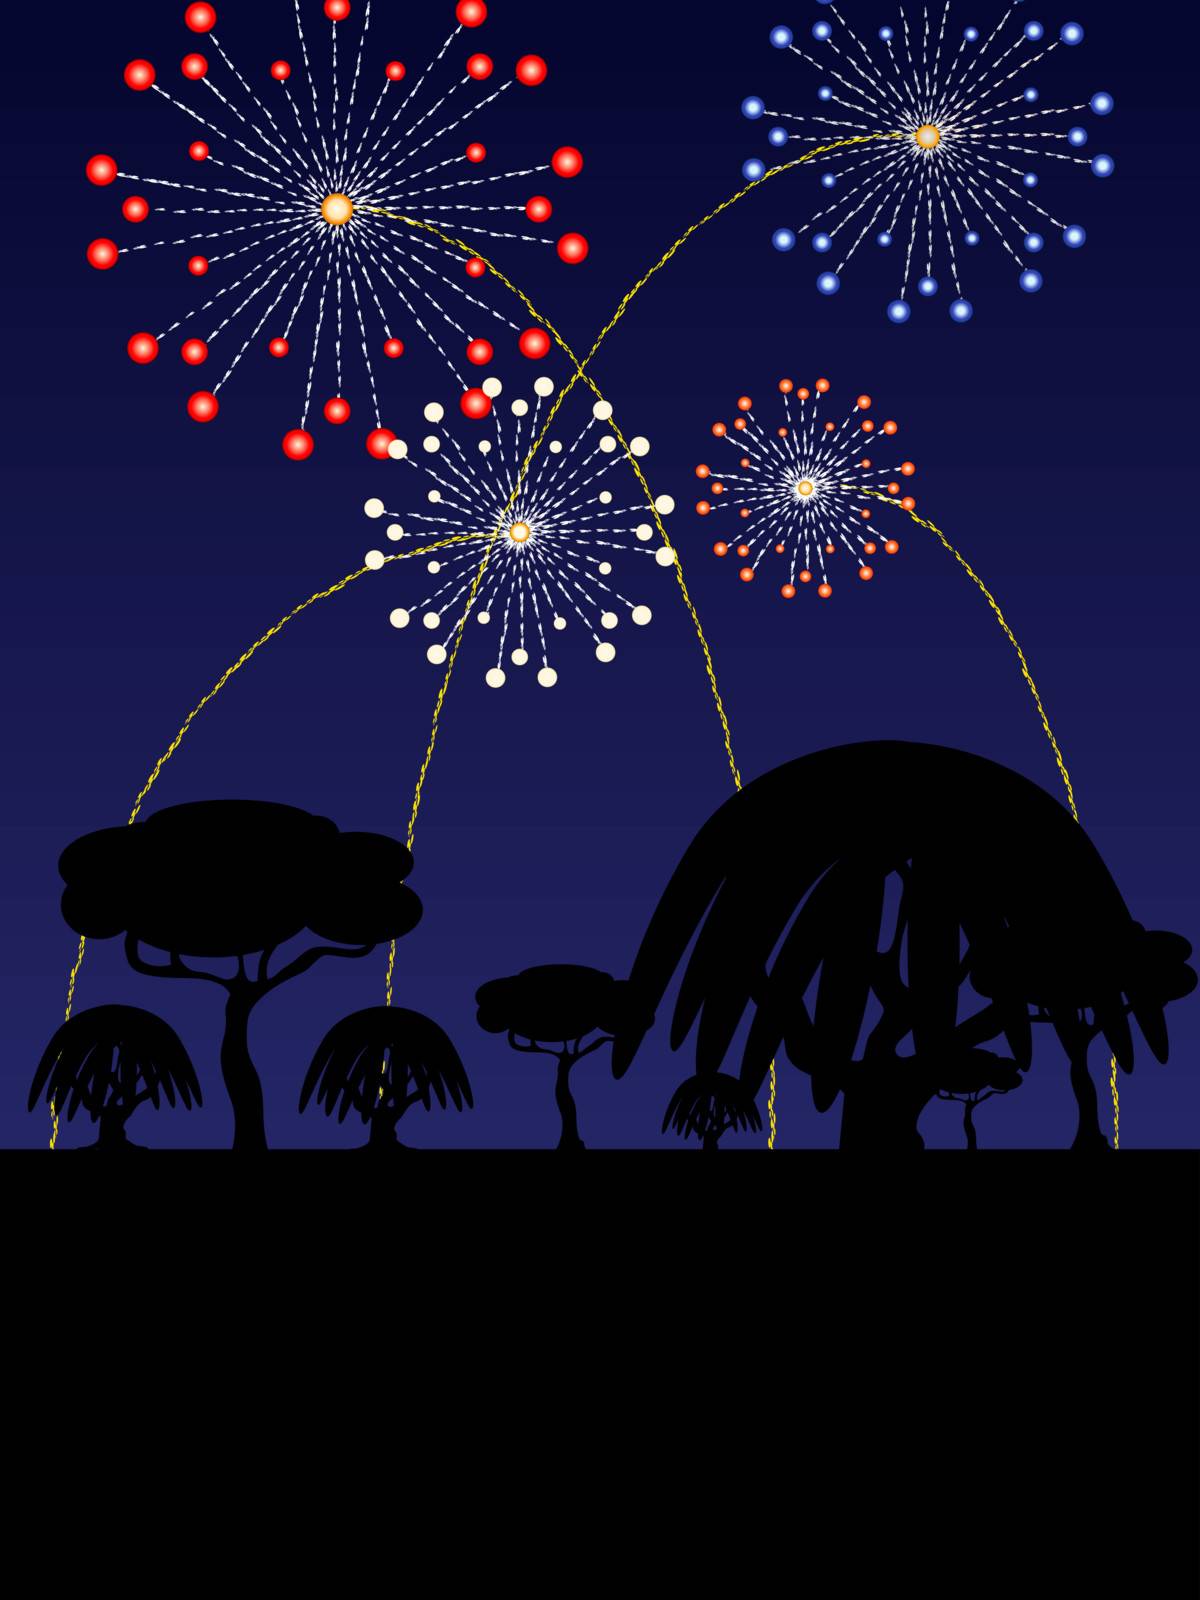 Fourth of July scene with fireworks, trees and horizon silhouette